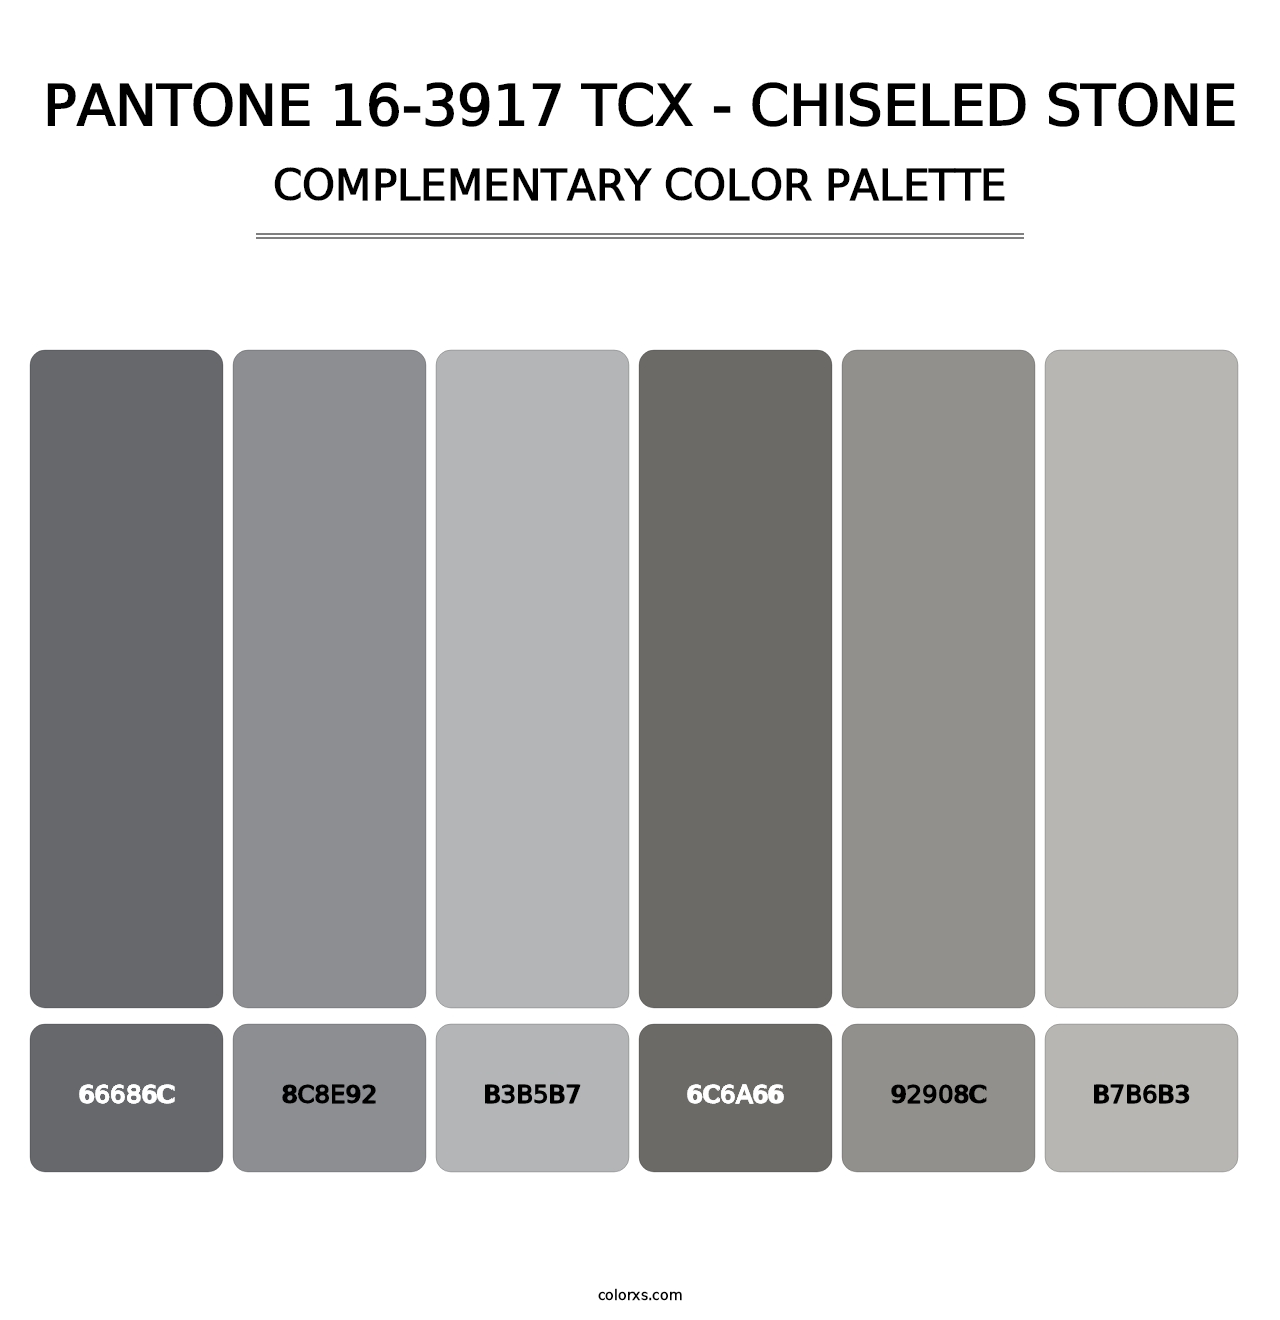 PANTONE 16-3917 TCX - Chiseled Stone - Complementary Color Palette